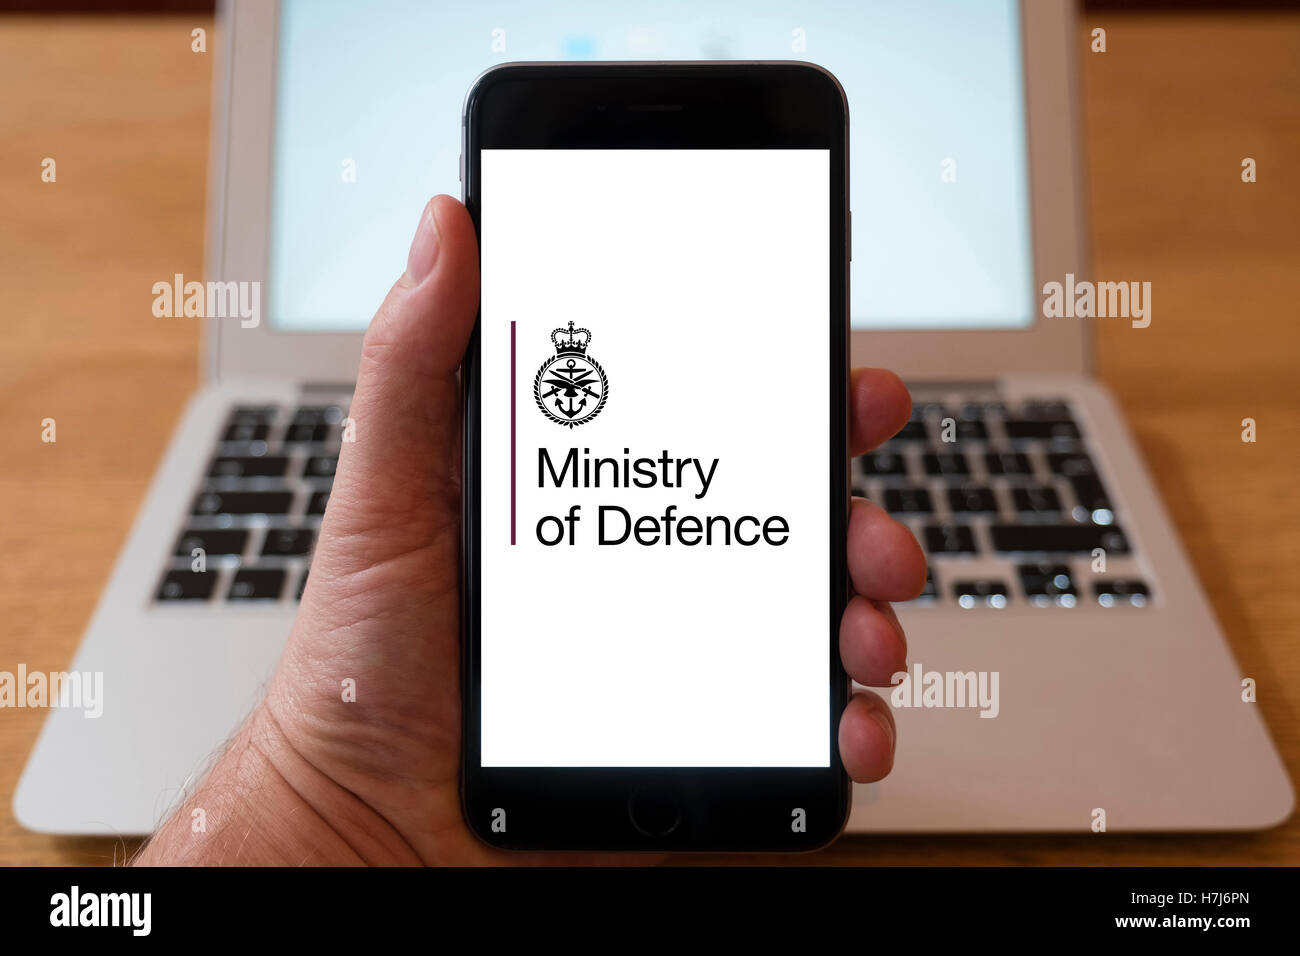 Using iPhone smart phone to display logo of the Ministry of Defence, UK Government Stock Photo